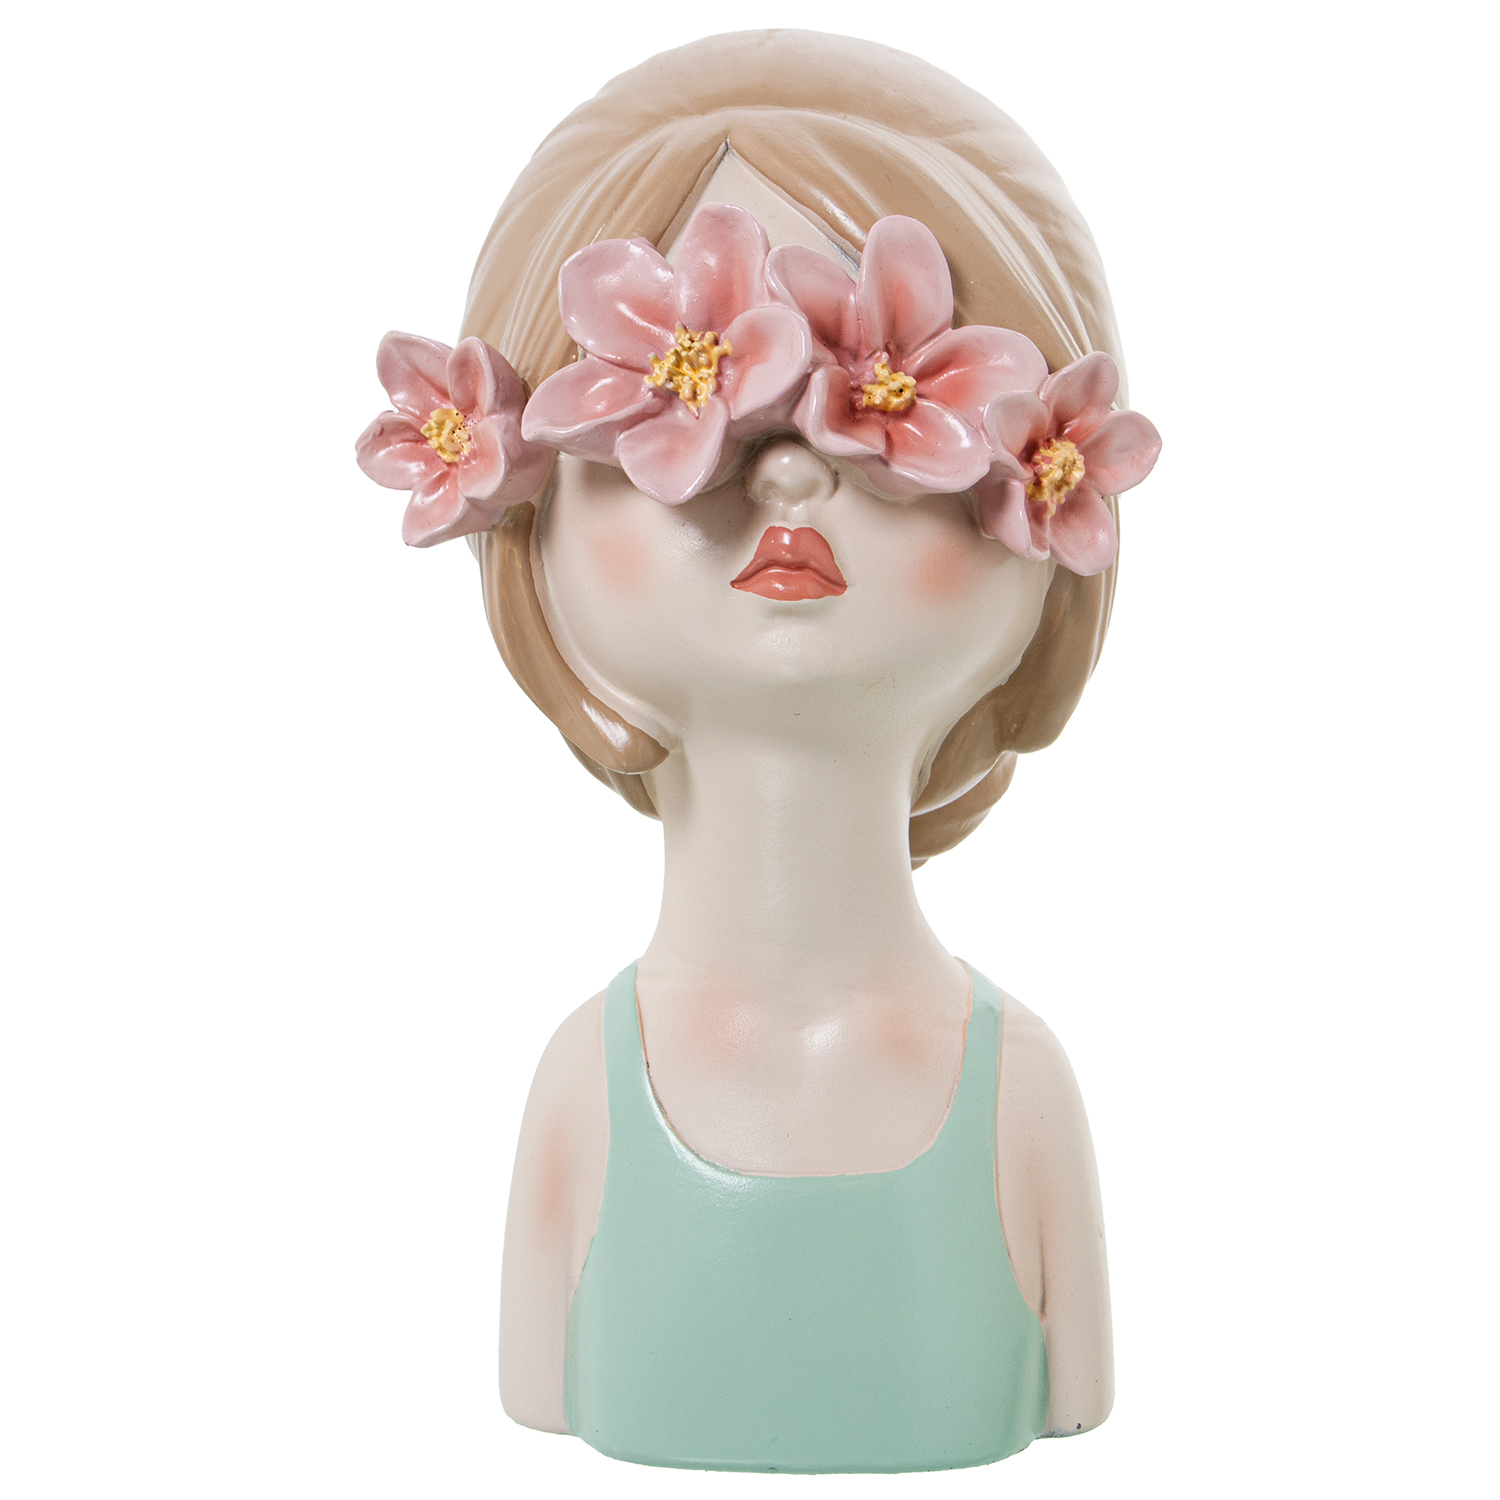 34597-busto-chica-flores.gif